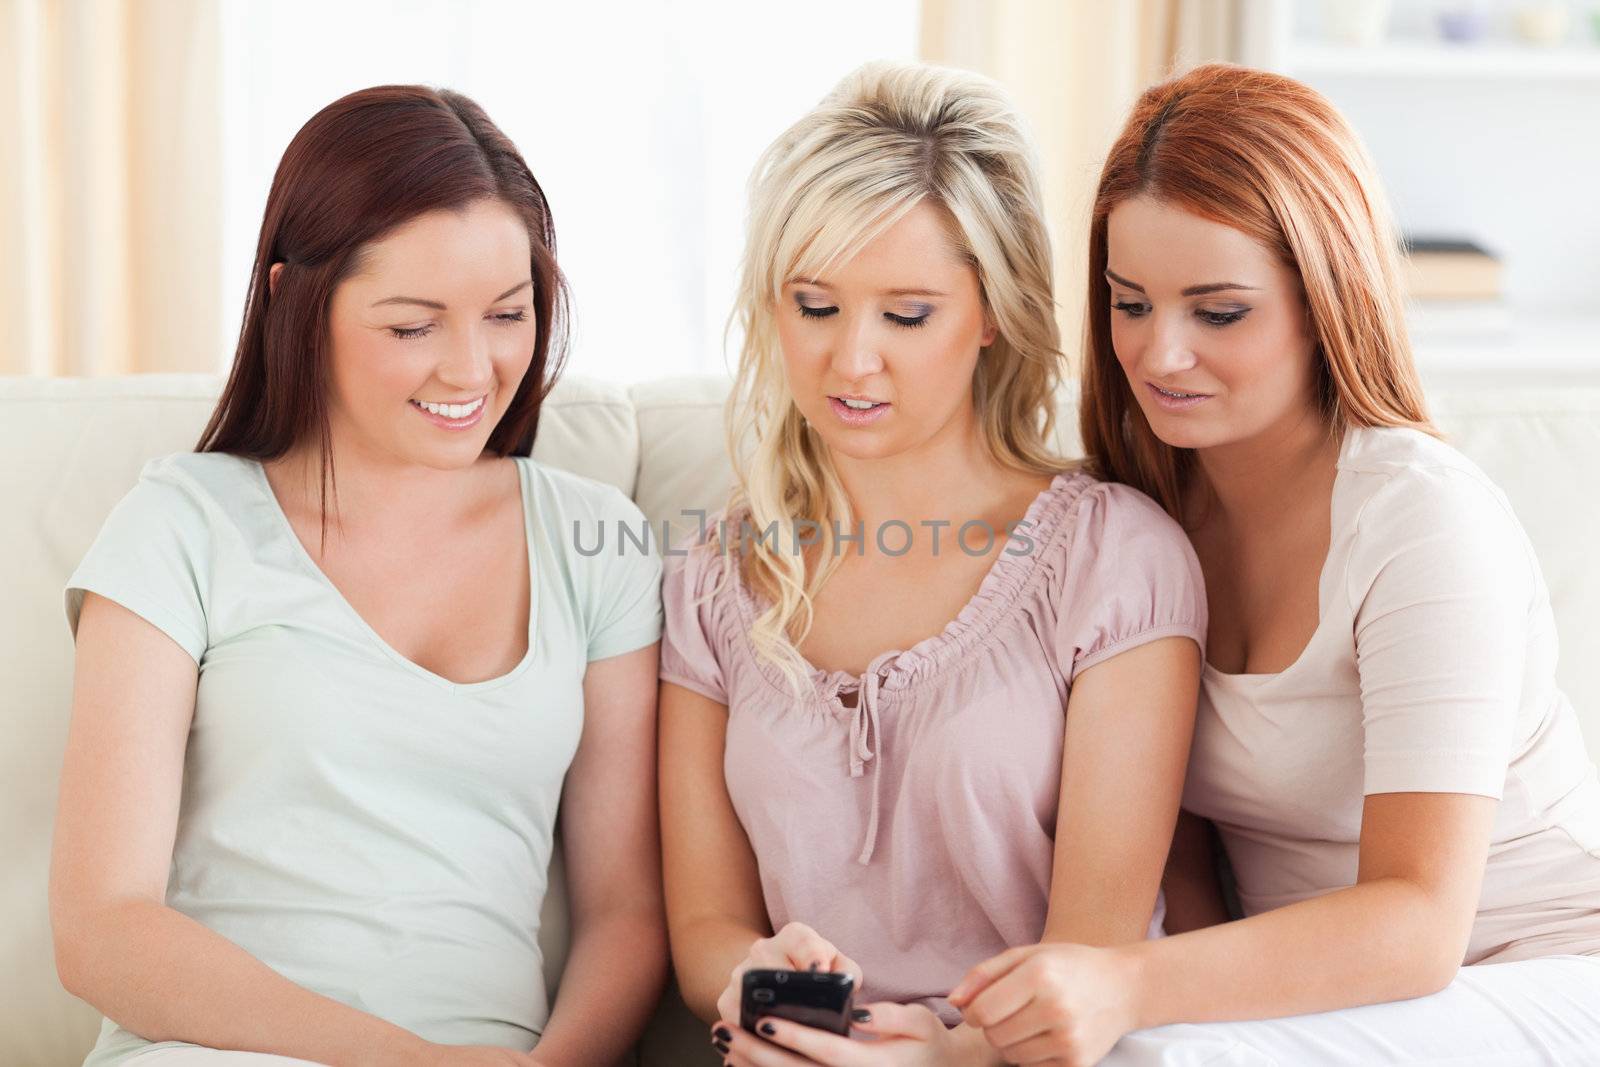 Young women lounging on a couch with a phone in a living room